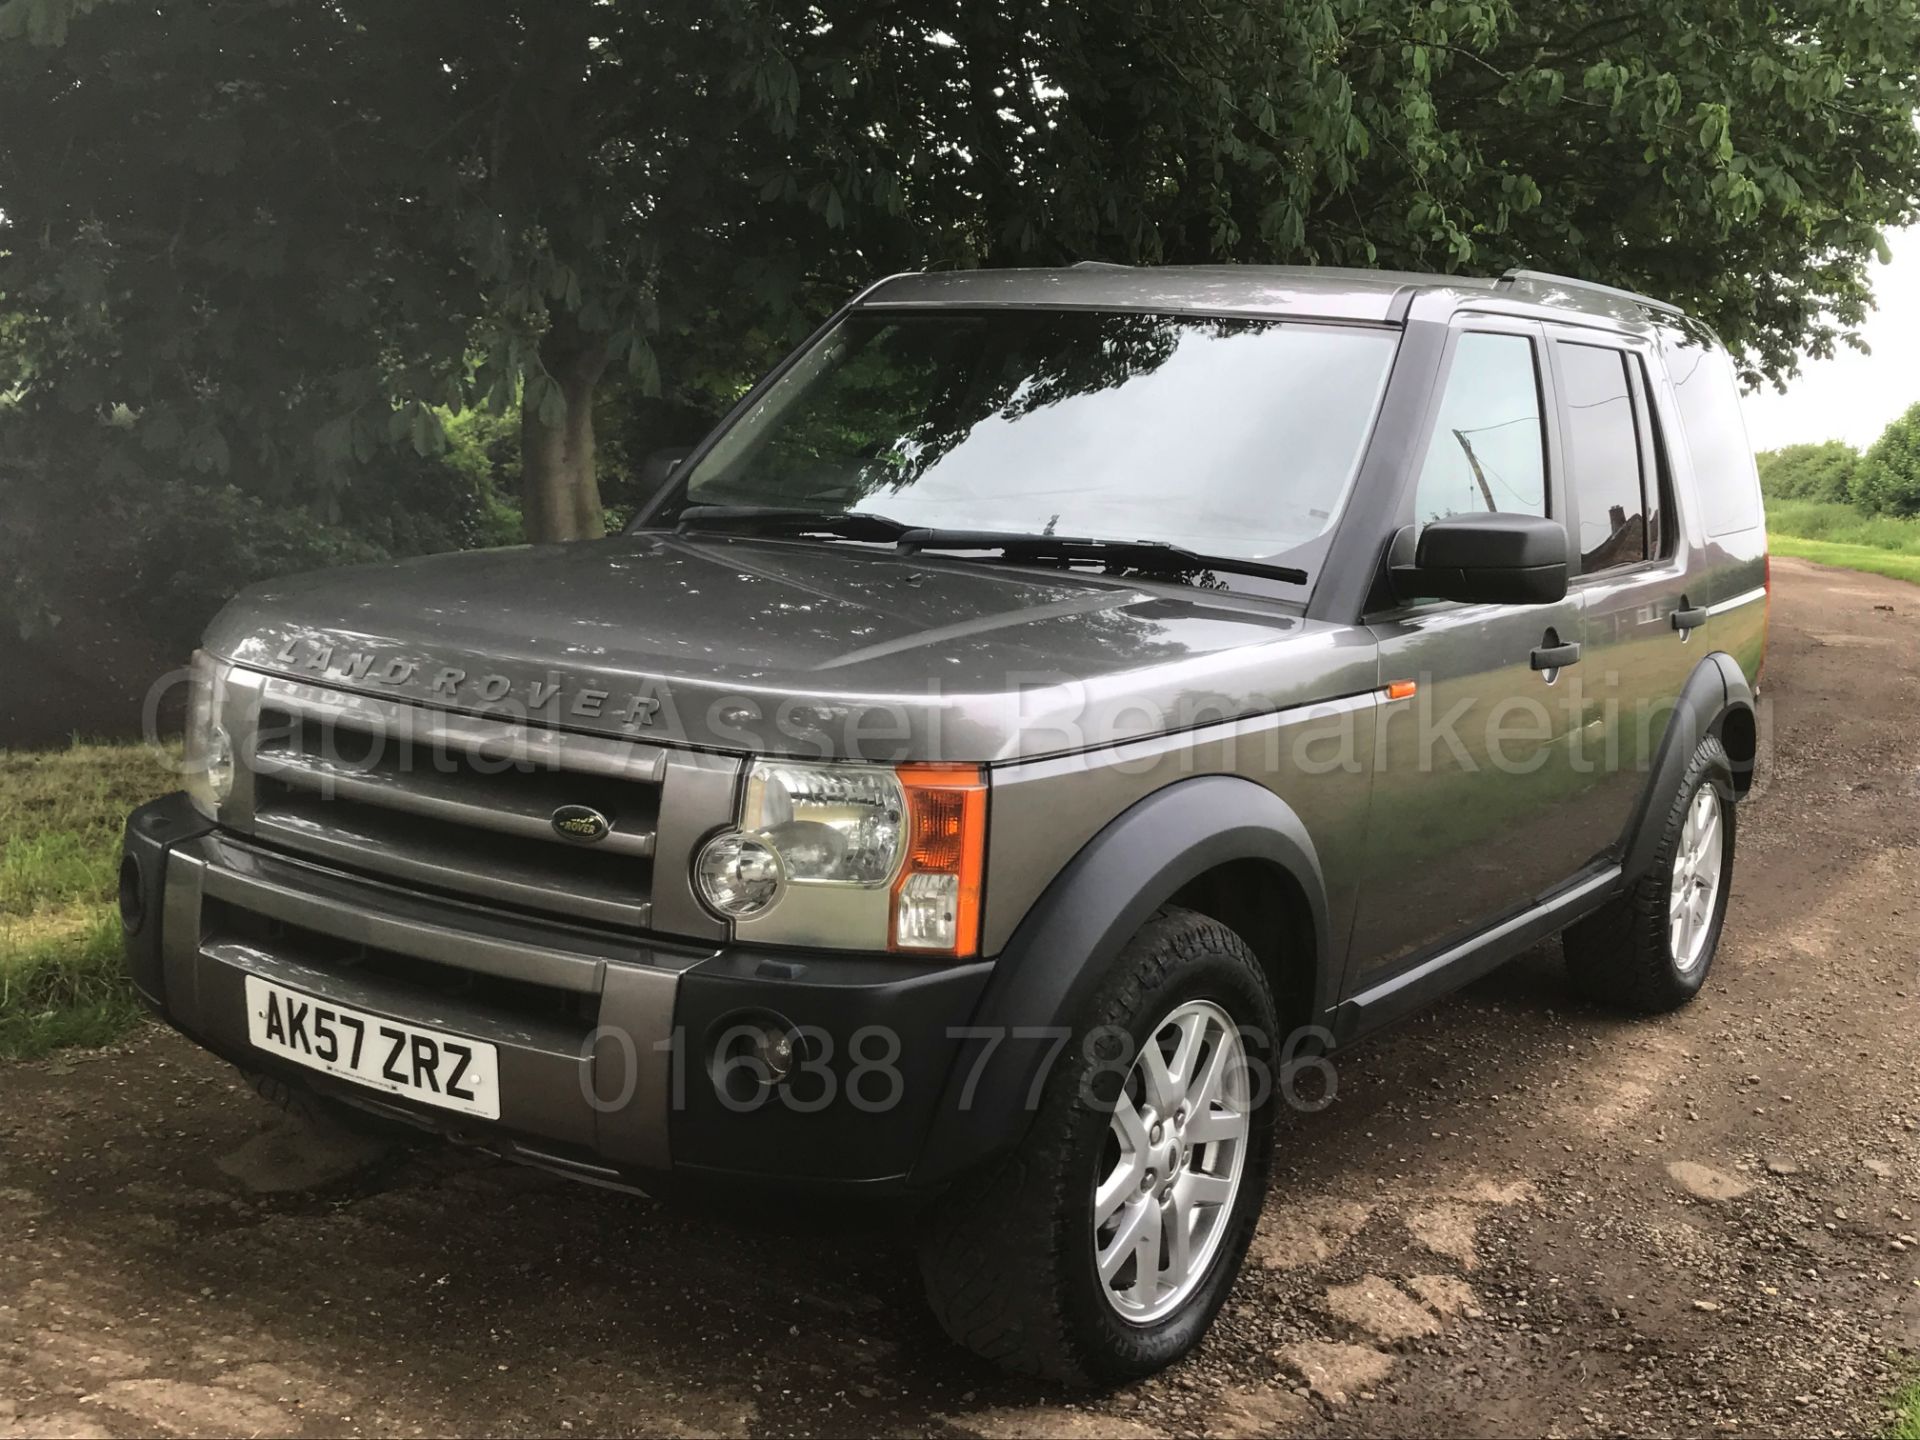 (On Sale) LAND ROVER DISCOVERY 3 'XS EDITION' **COMMERCIAL VAN**(2008 MODEL) 'TDV6-190 BHP' (NO VAT) - Image 4 of 38